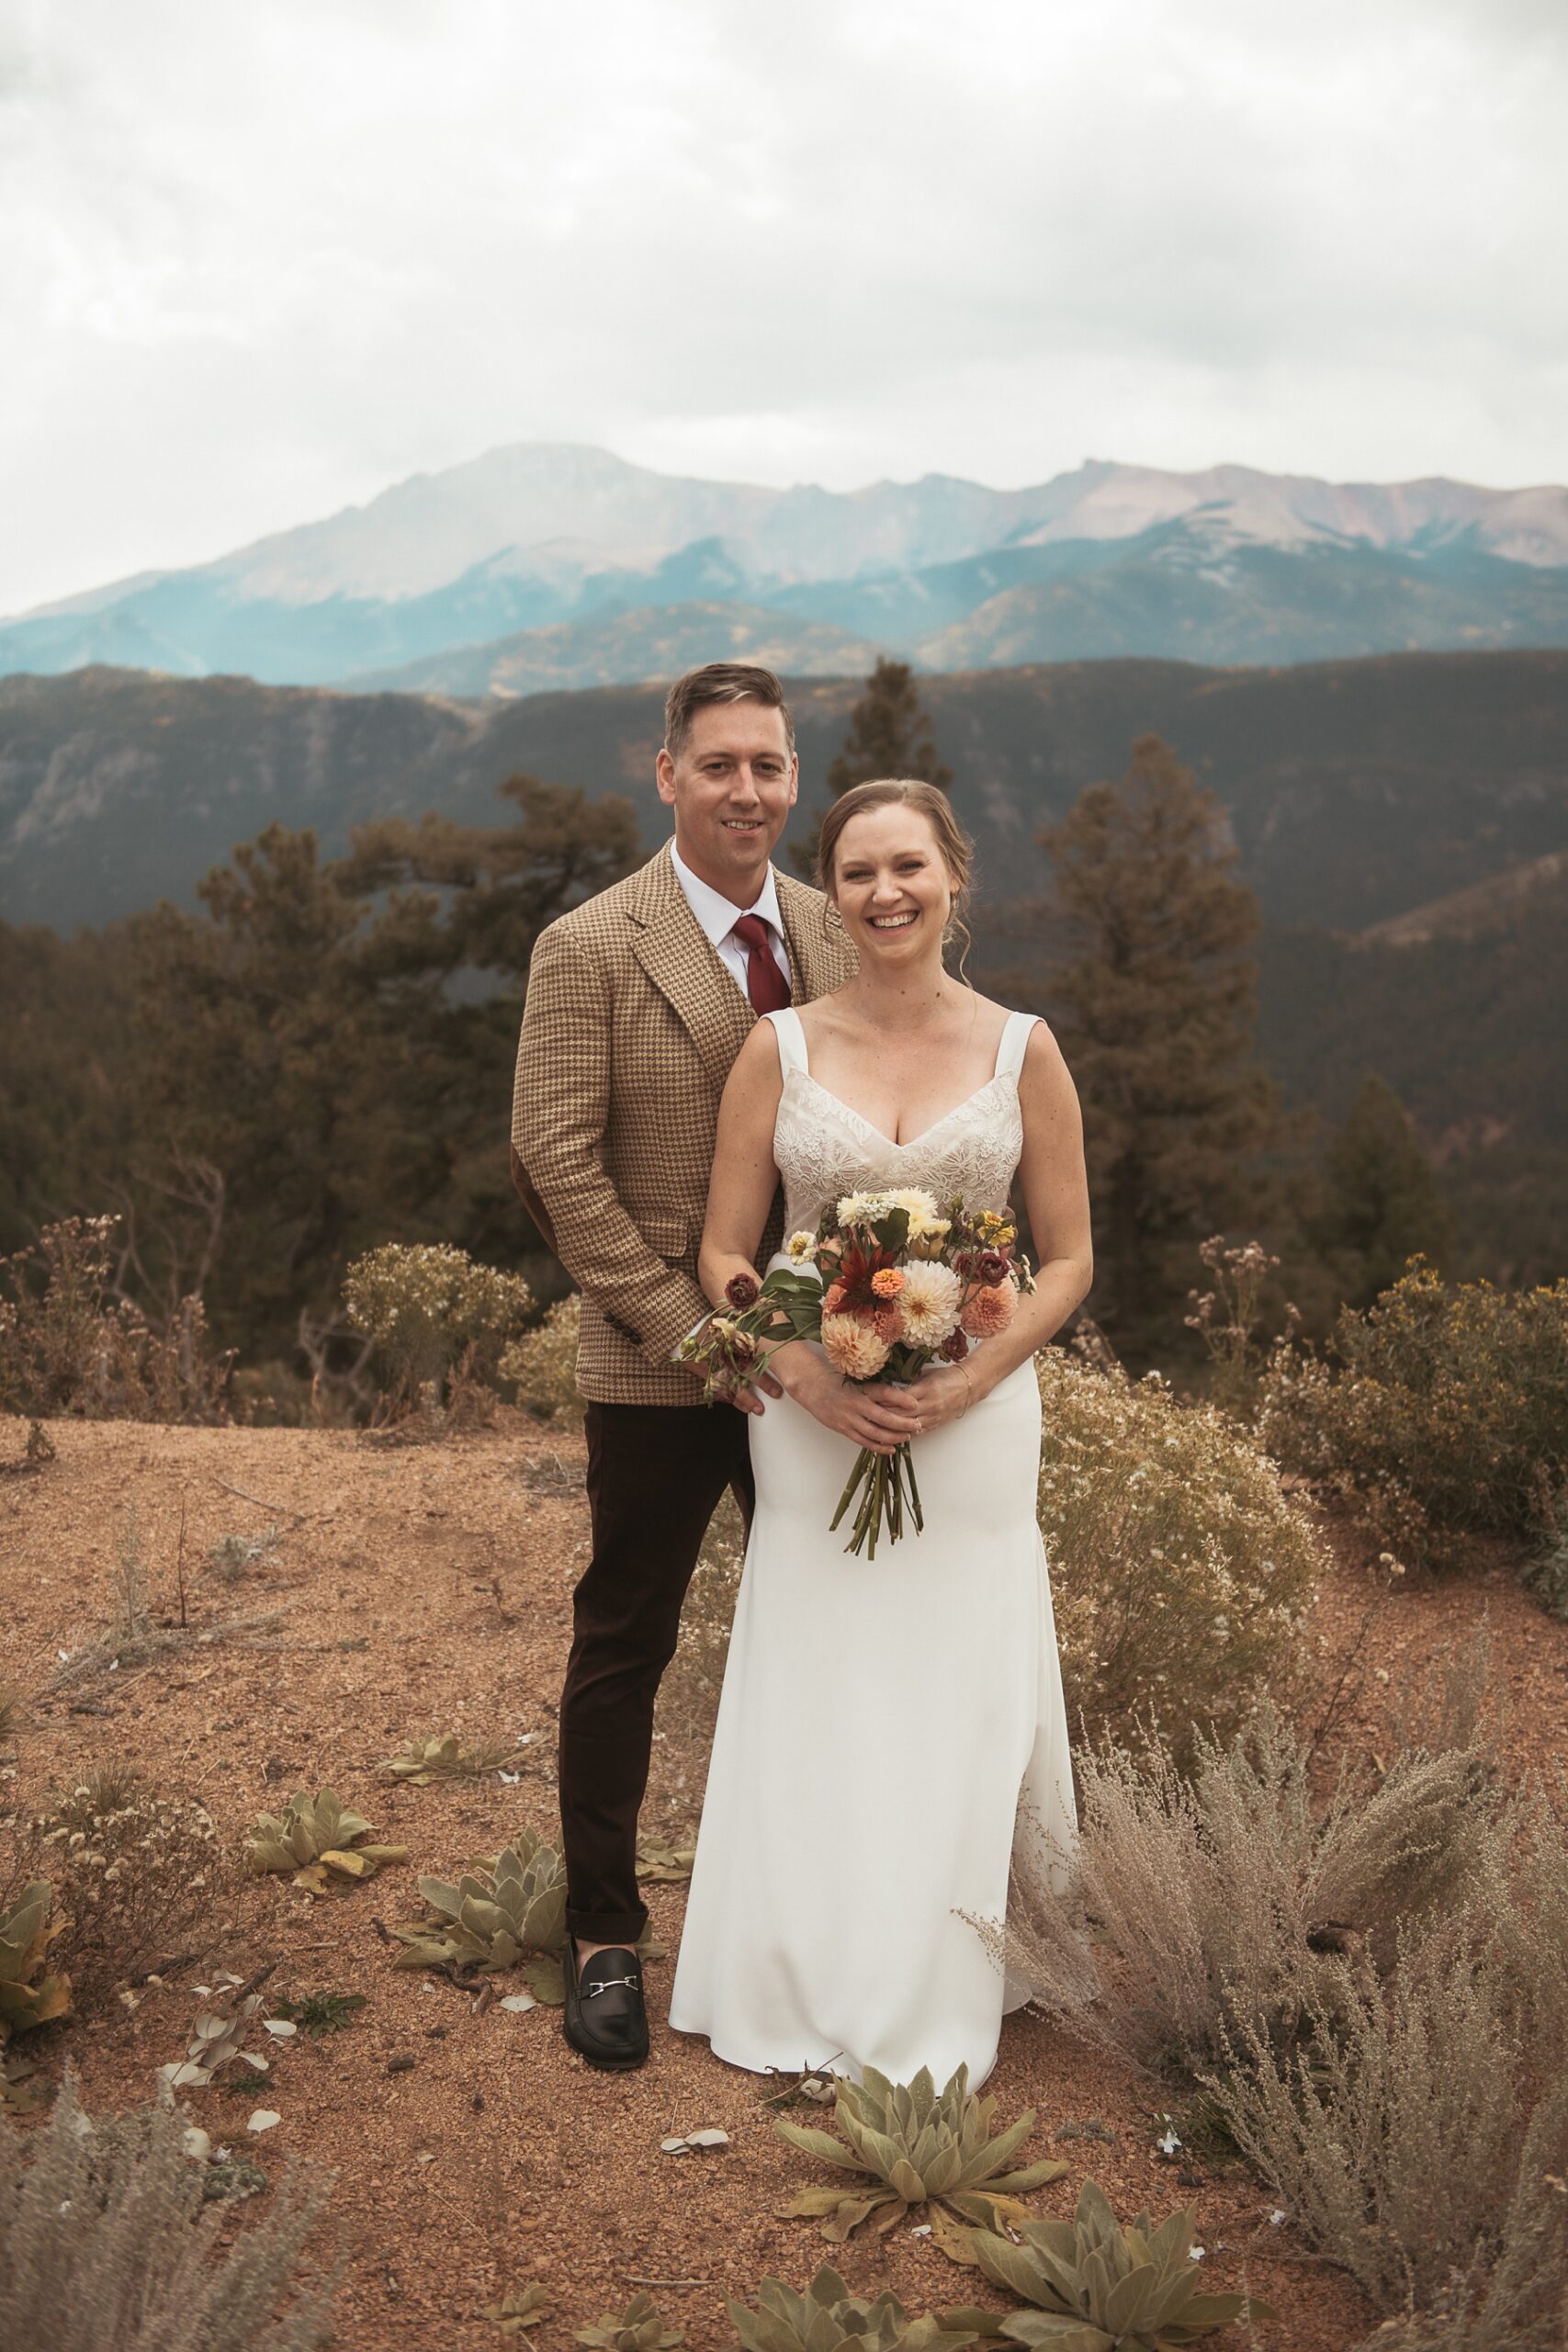 Bride and groom standing in front of mountains at Airbnb wedding venue in Colorado